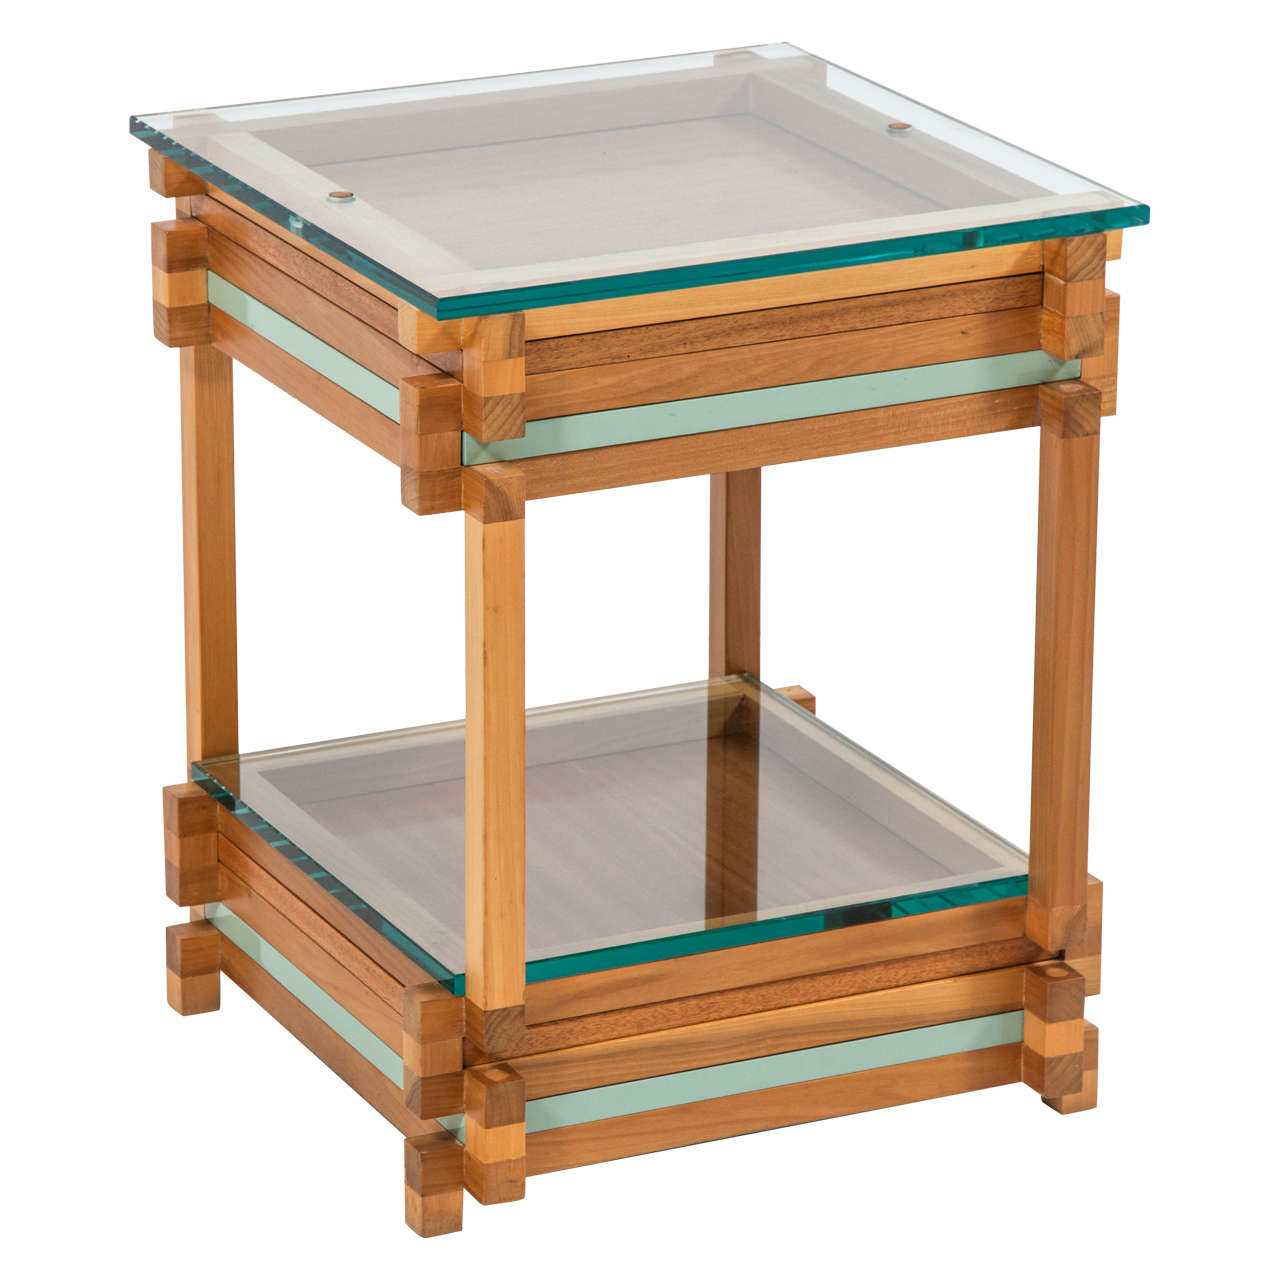 Architectural Glass Top Puzzle Table